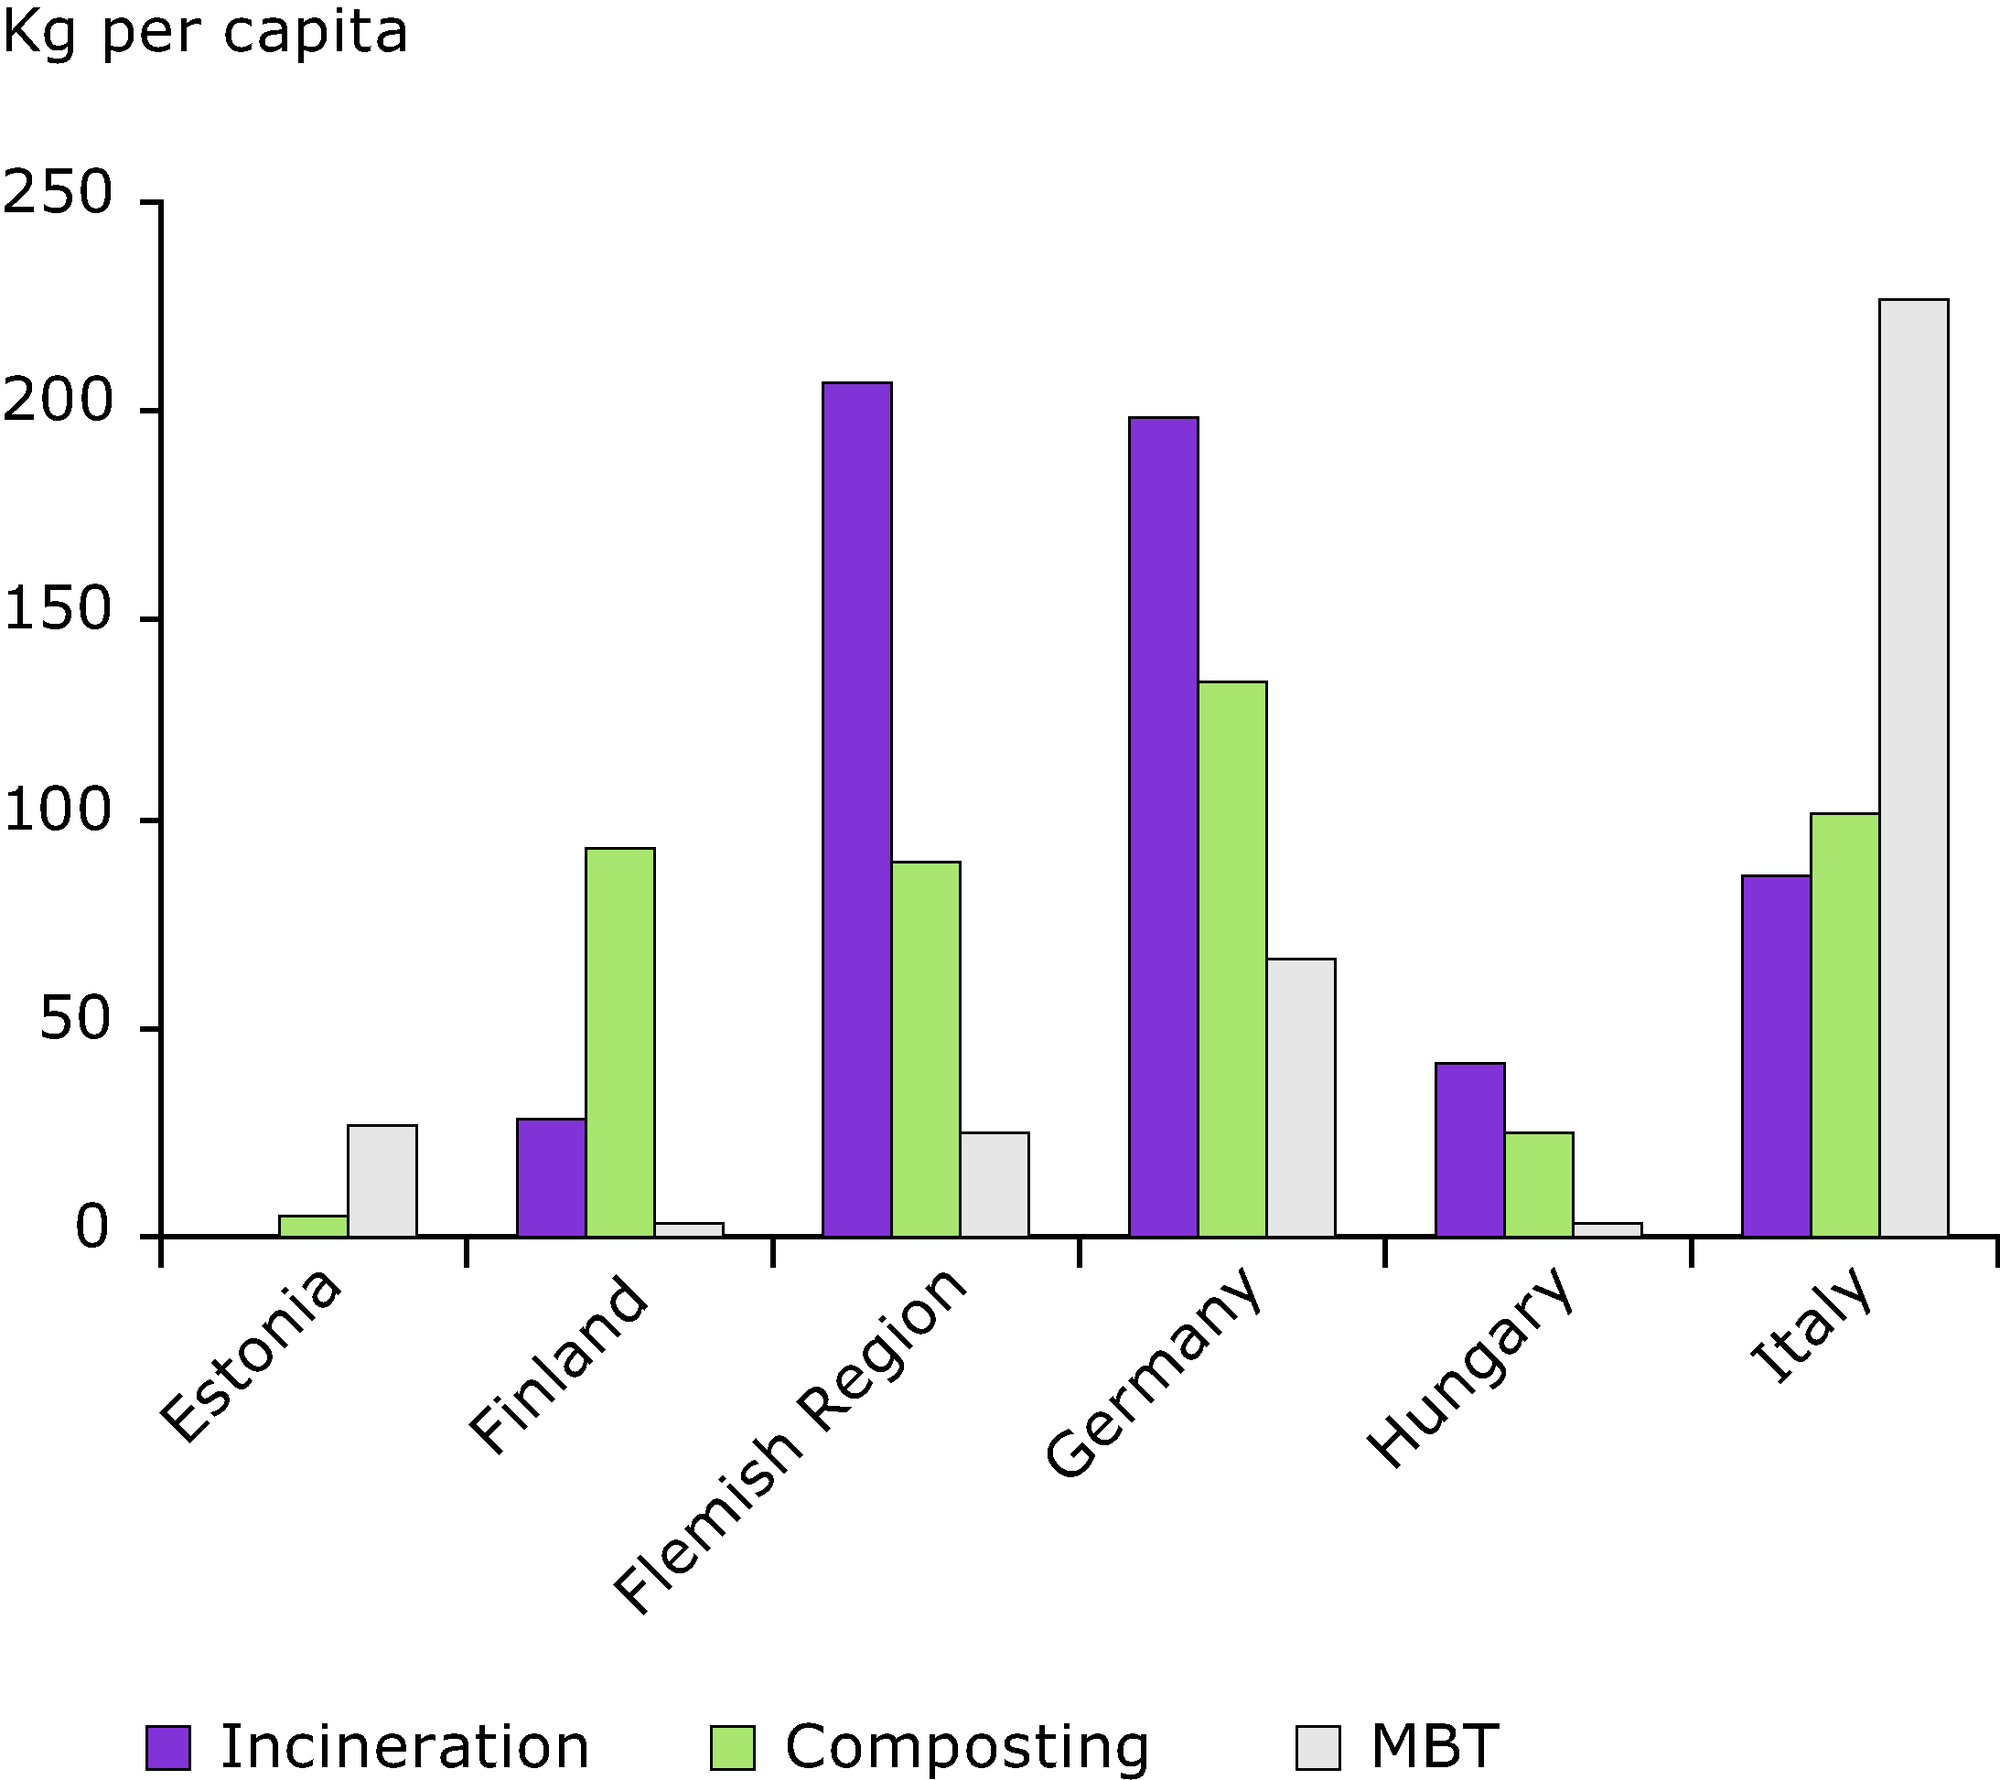 Capacities for dedicated incineration, composting and MBT of municipal waste in five countries and one region European Environment Agency